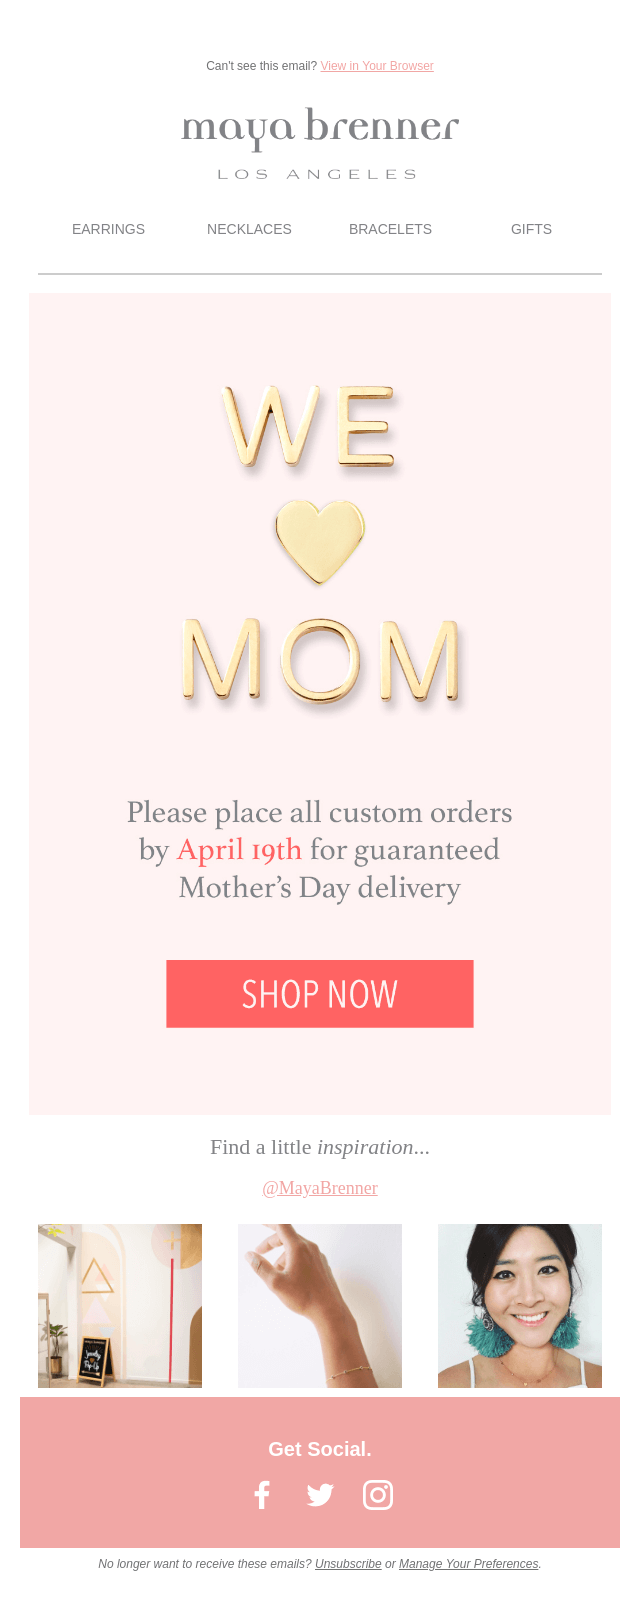 Image shows a mother’s day email campaign from Maya Brenner